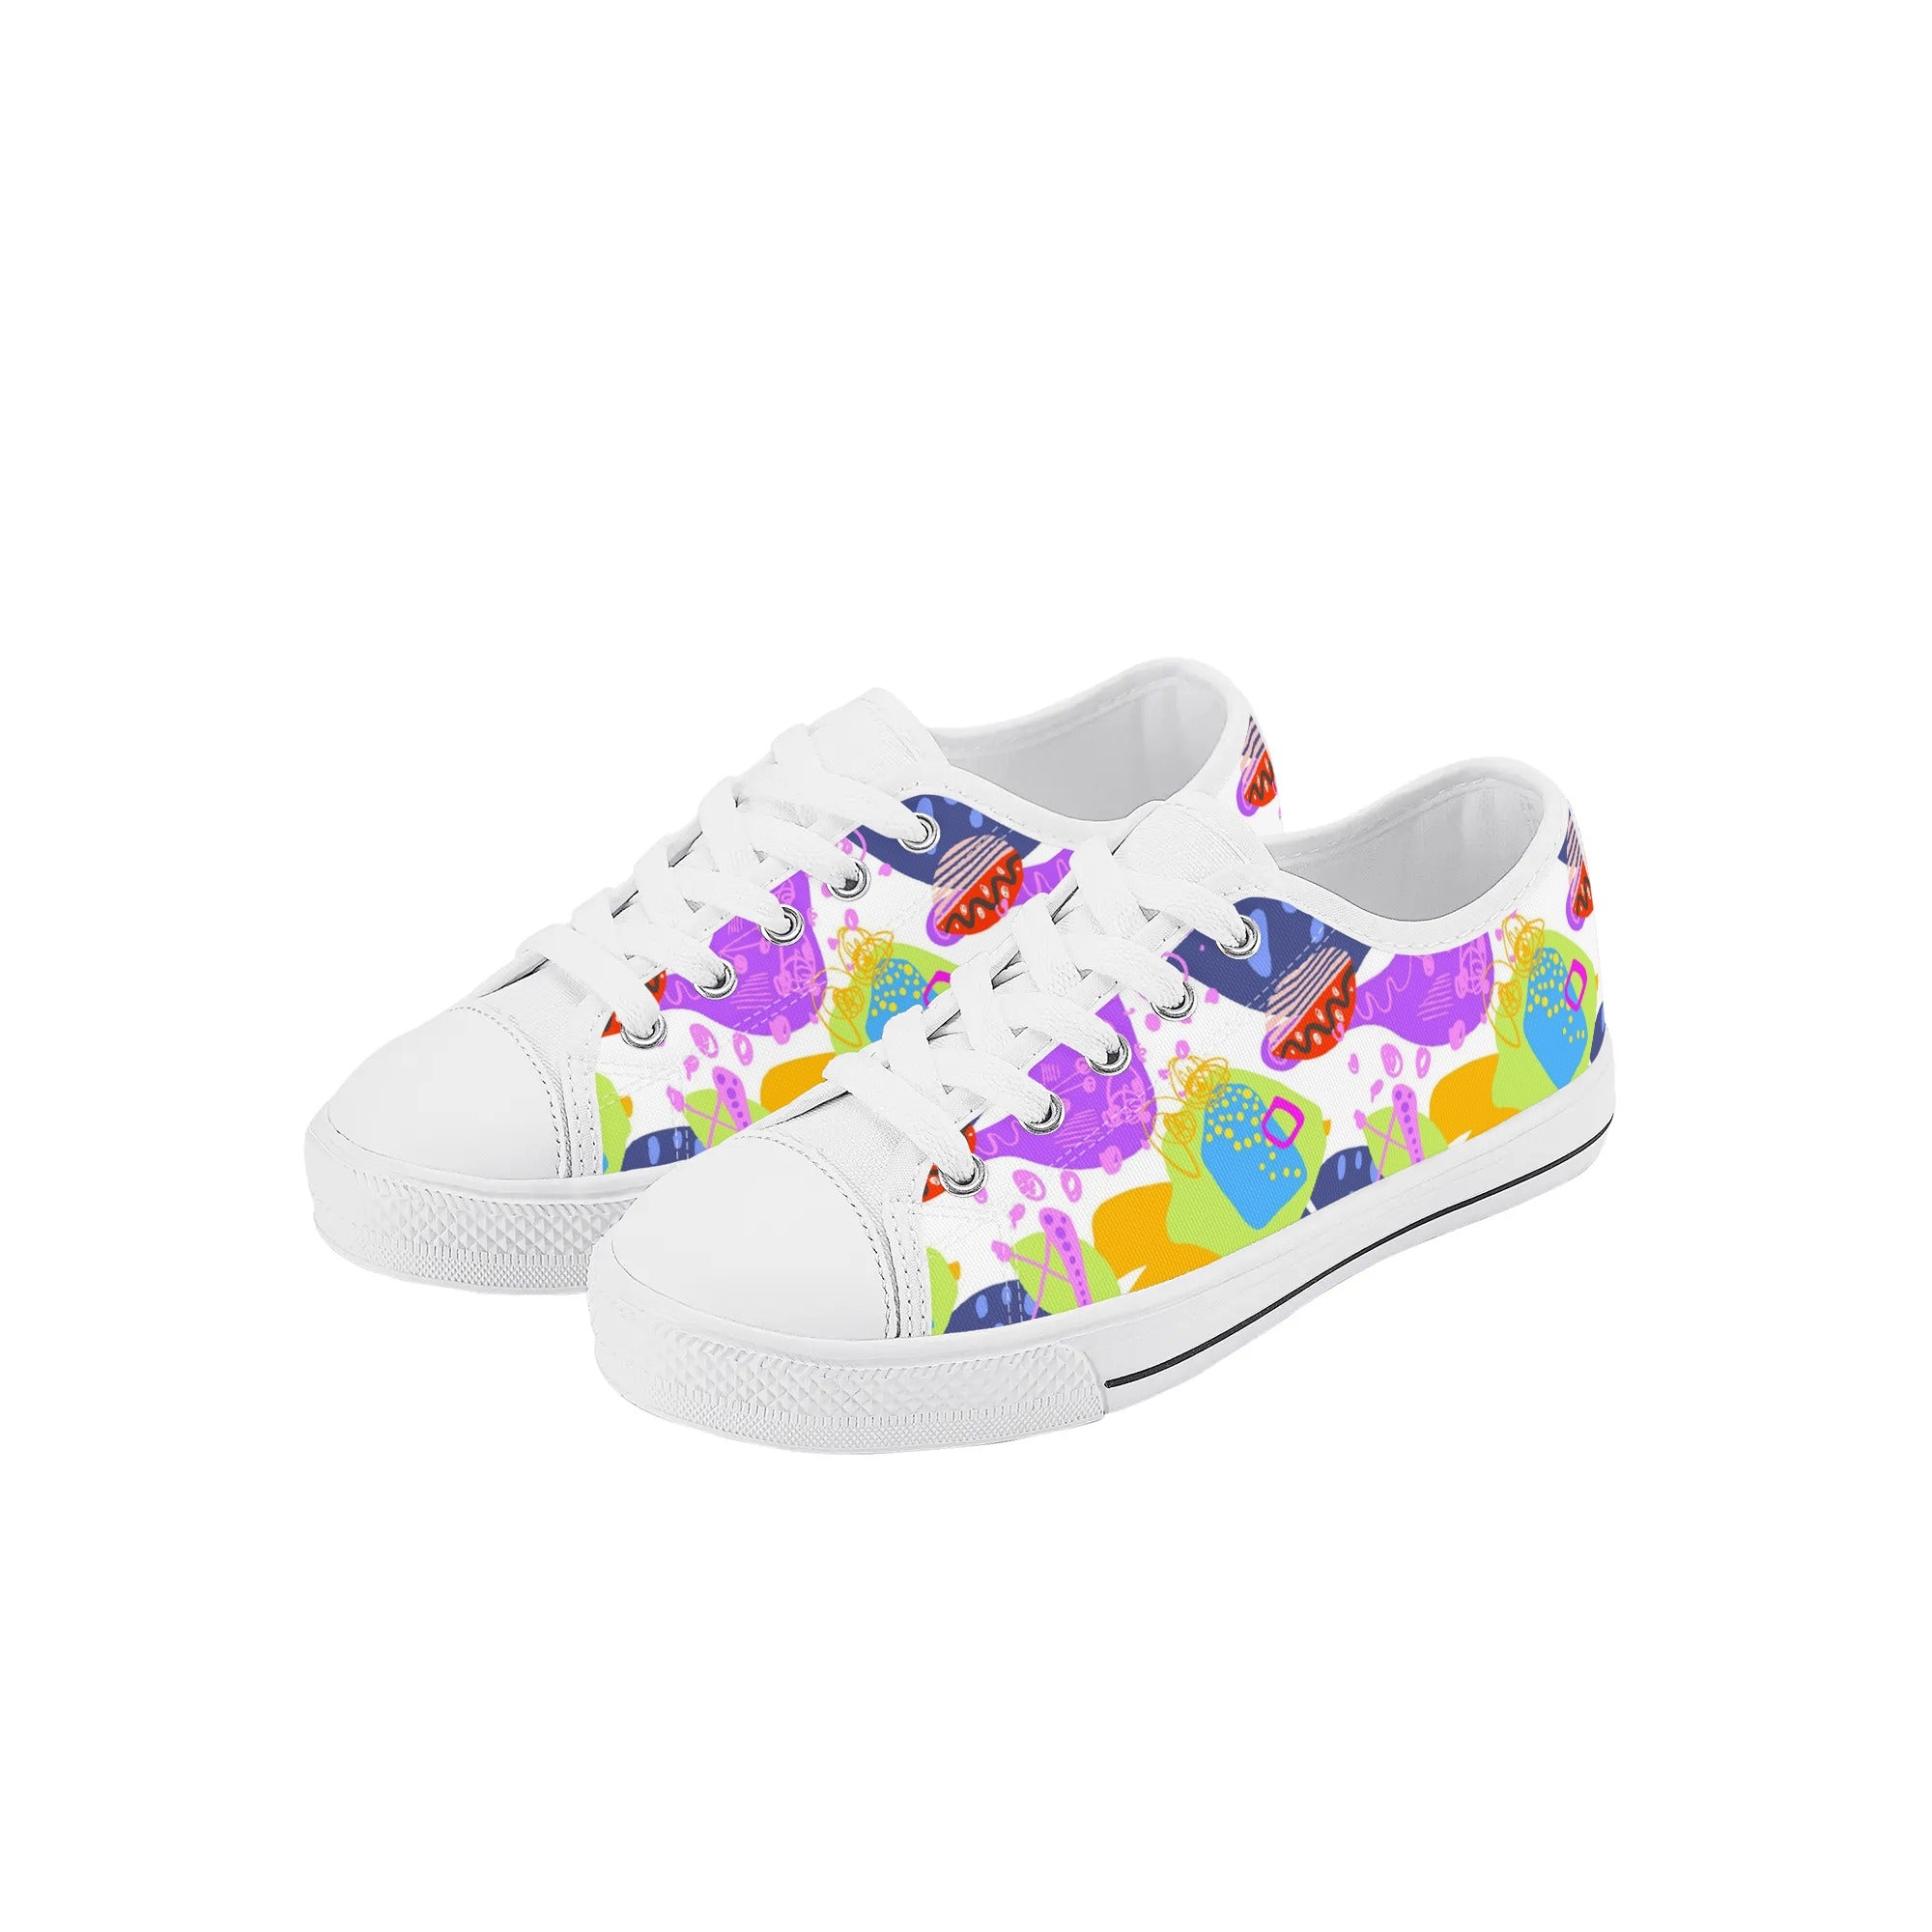 Kids Low Top Canvas Shoes - Abstract Doodles